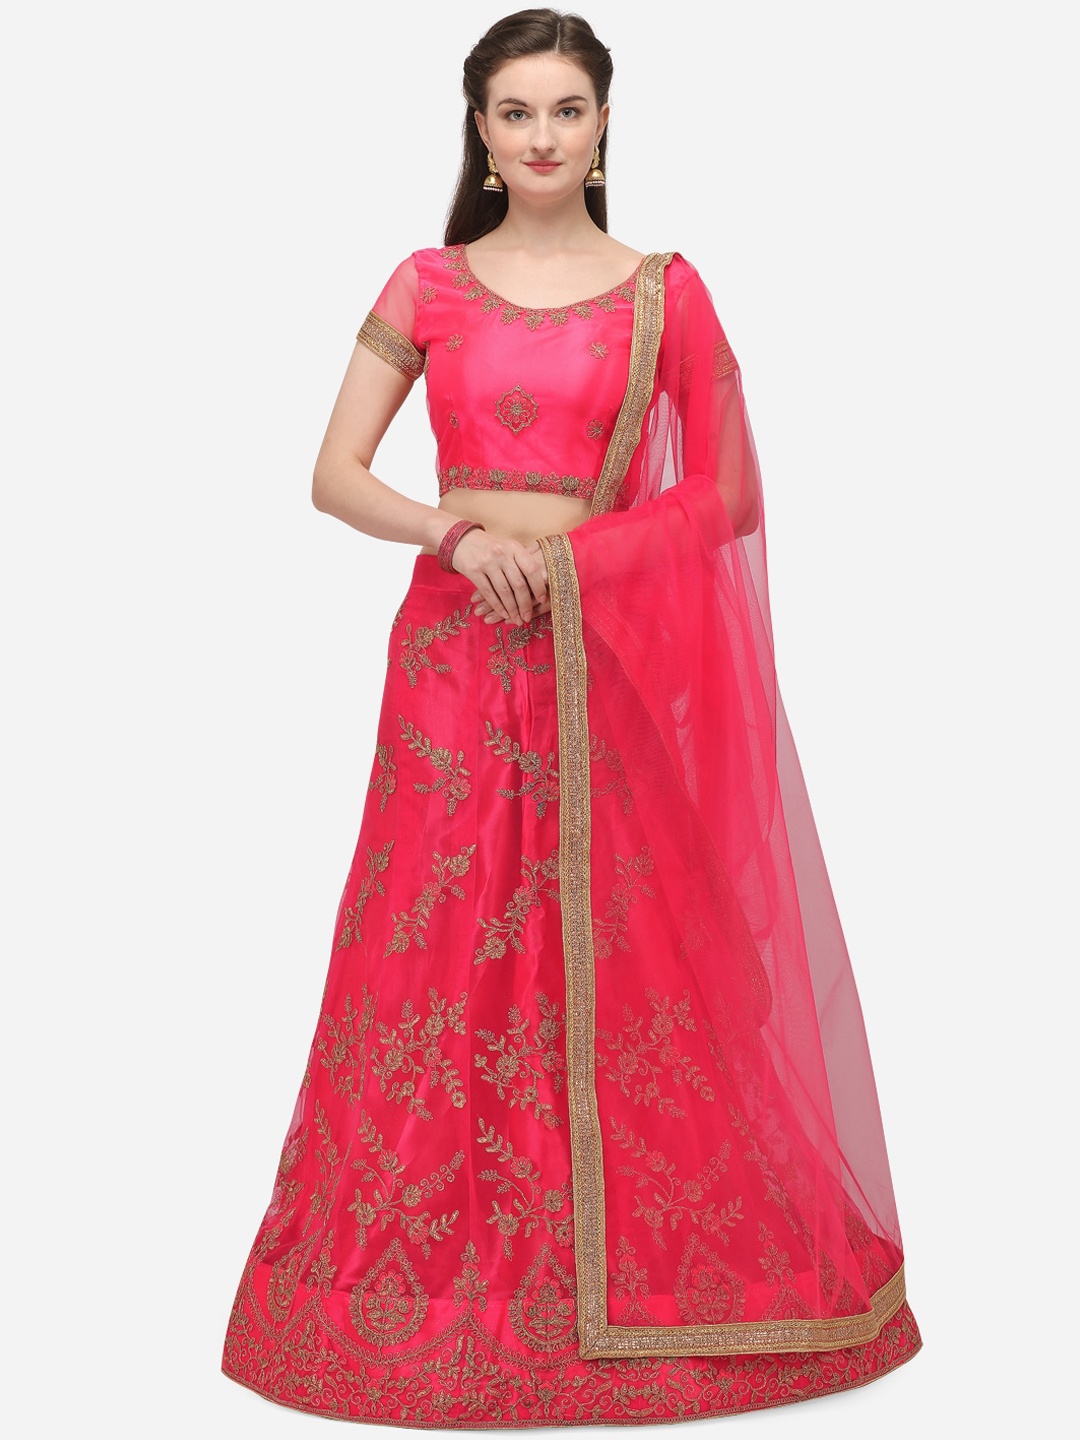 

Netram Pink & Gold-Toned Embroidered Semi-Stitched Lehenga & Unstitched Blouse with Dupatta